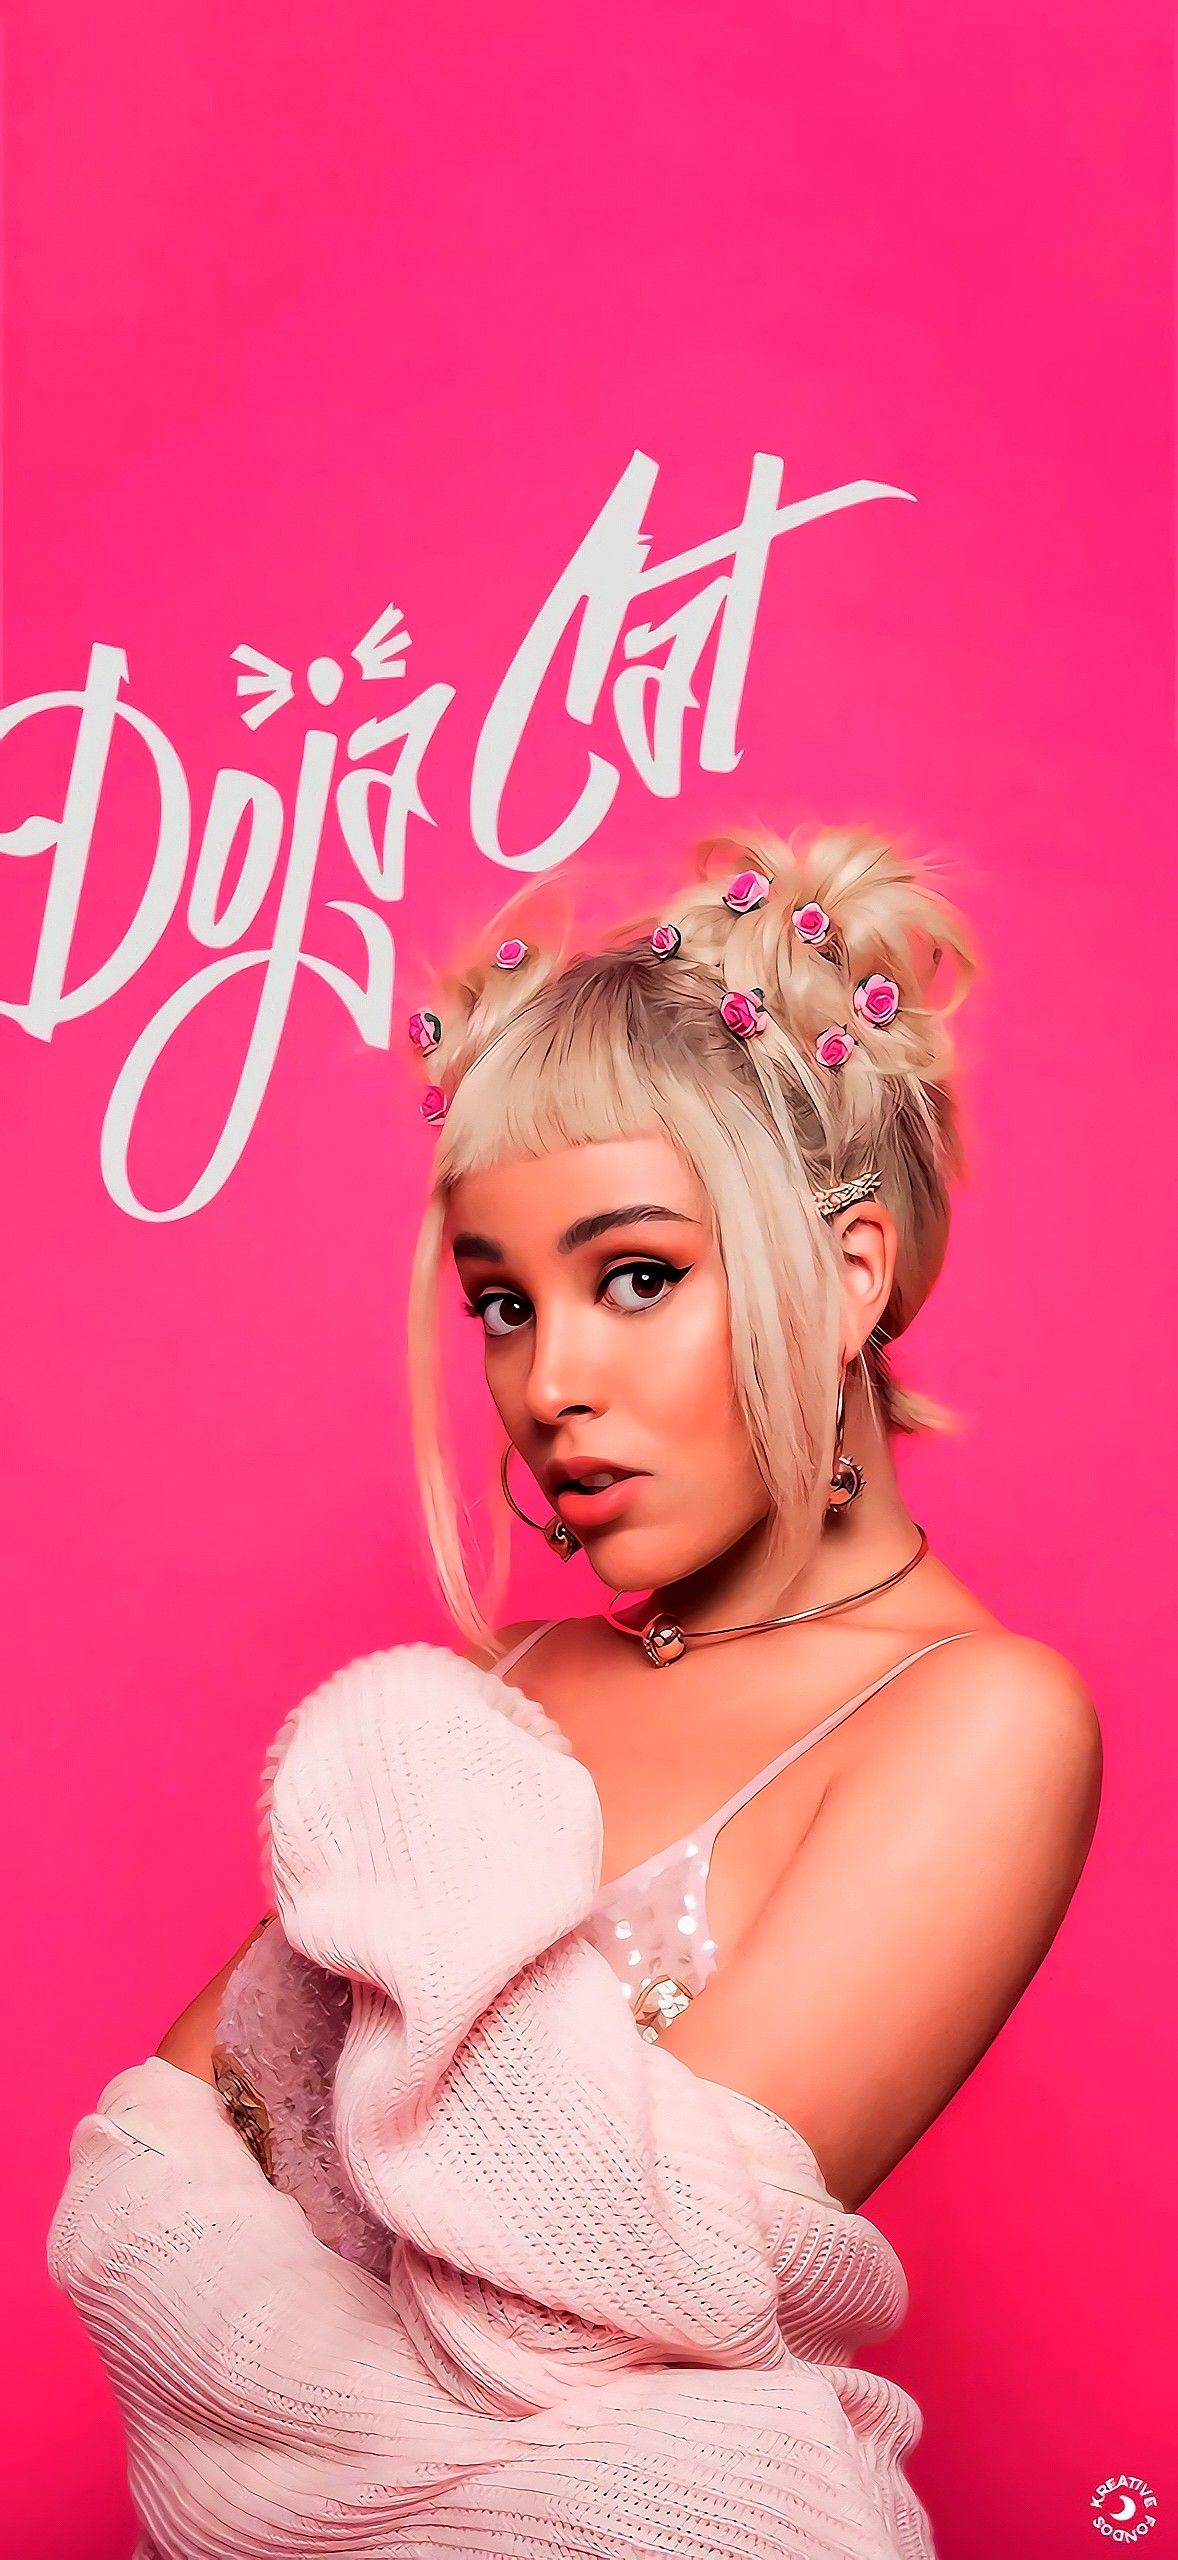 A woman in pink is posing for the camera - Doja Cat